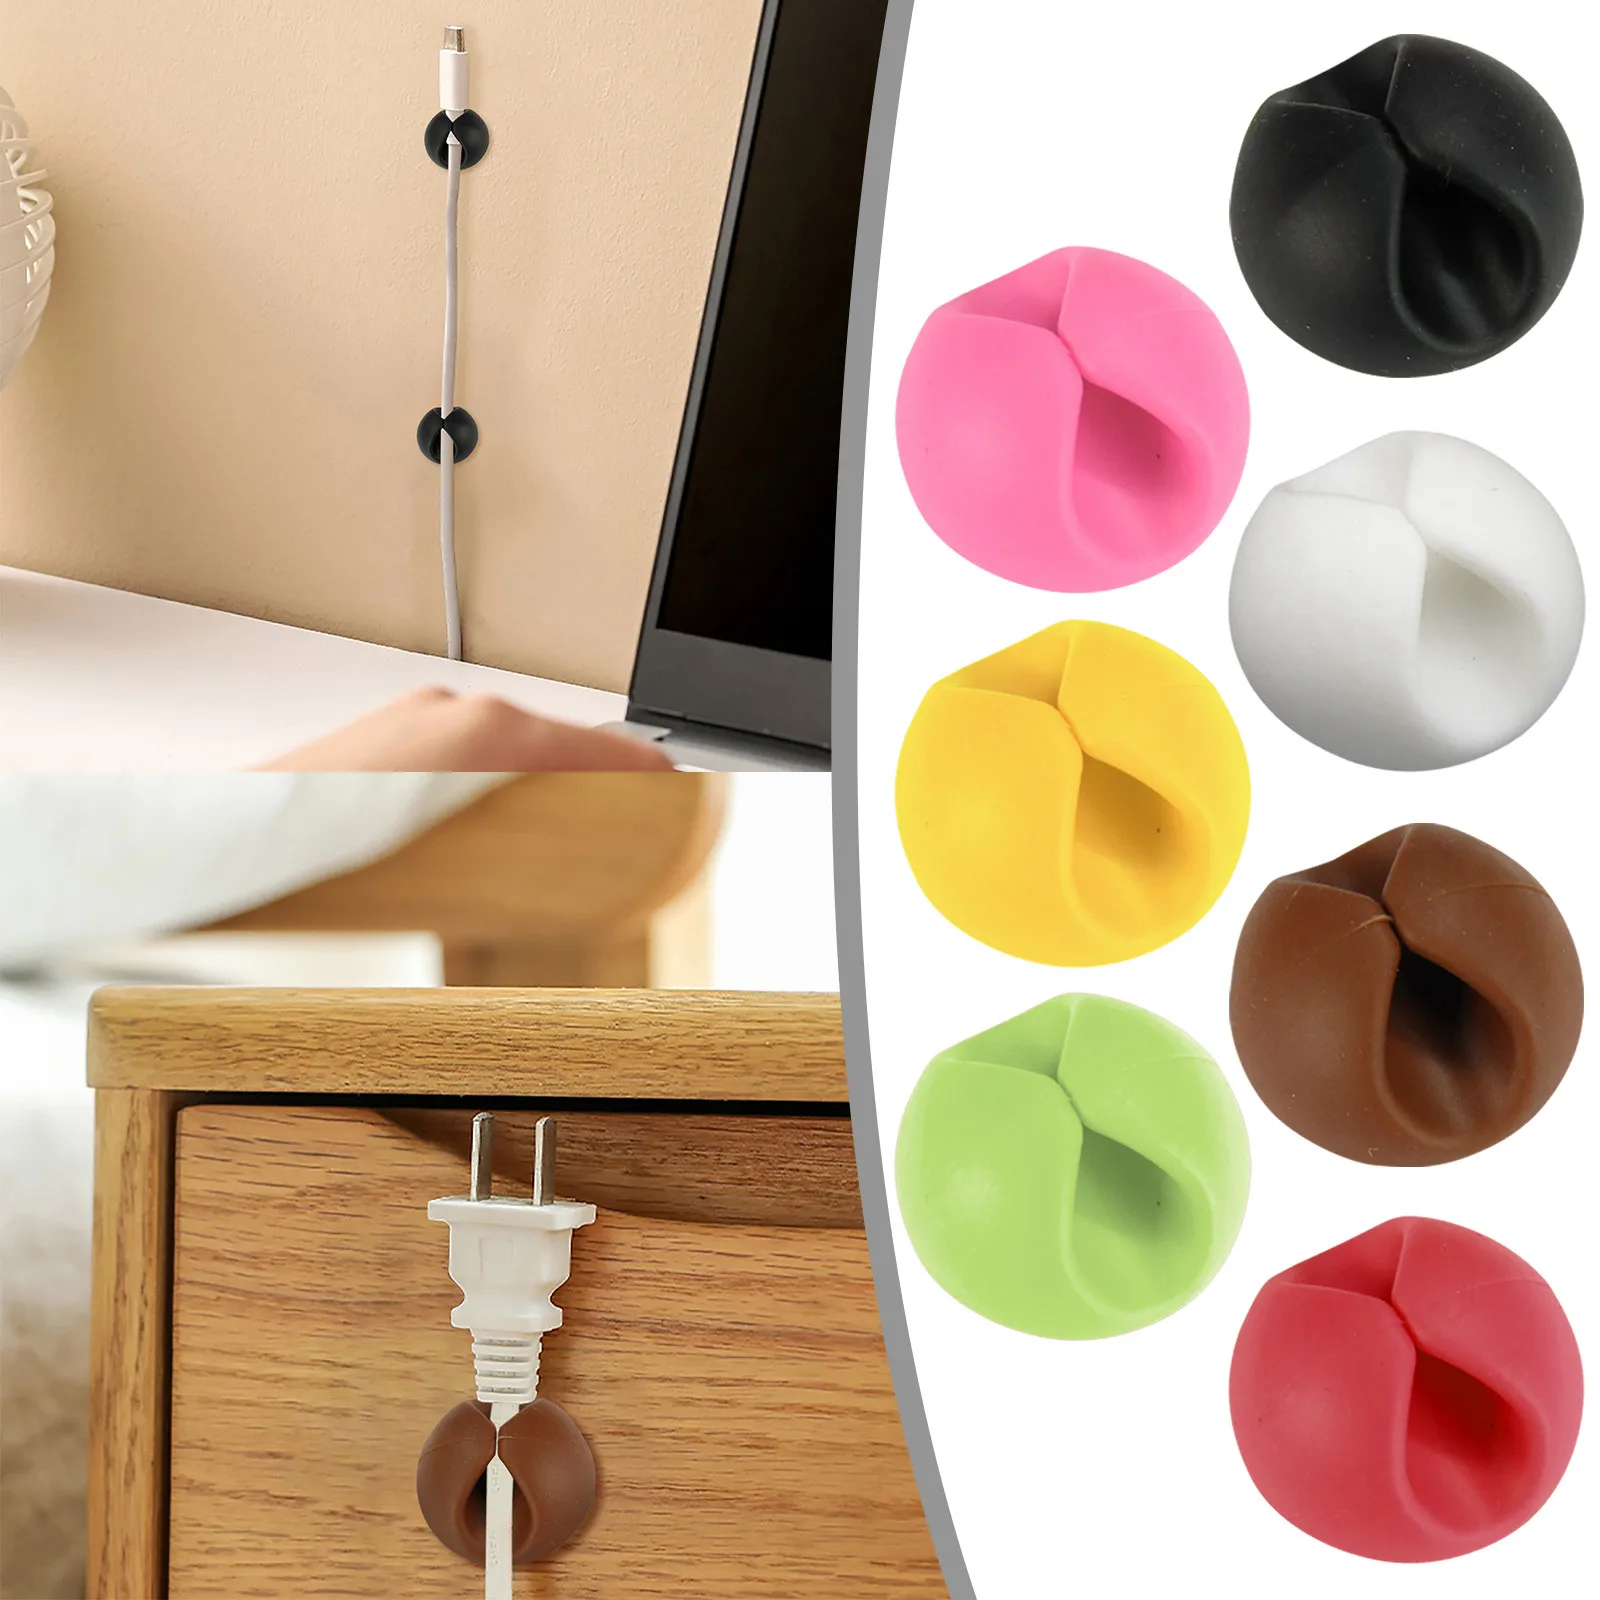 

USB Winder Organizer Silicone Cable Management Clips Desktop Wire Manager Cord Holder For Headphone Earphone Mouse Bobbin Winder